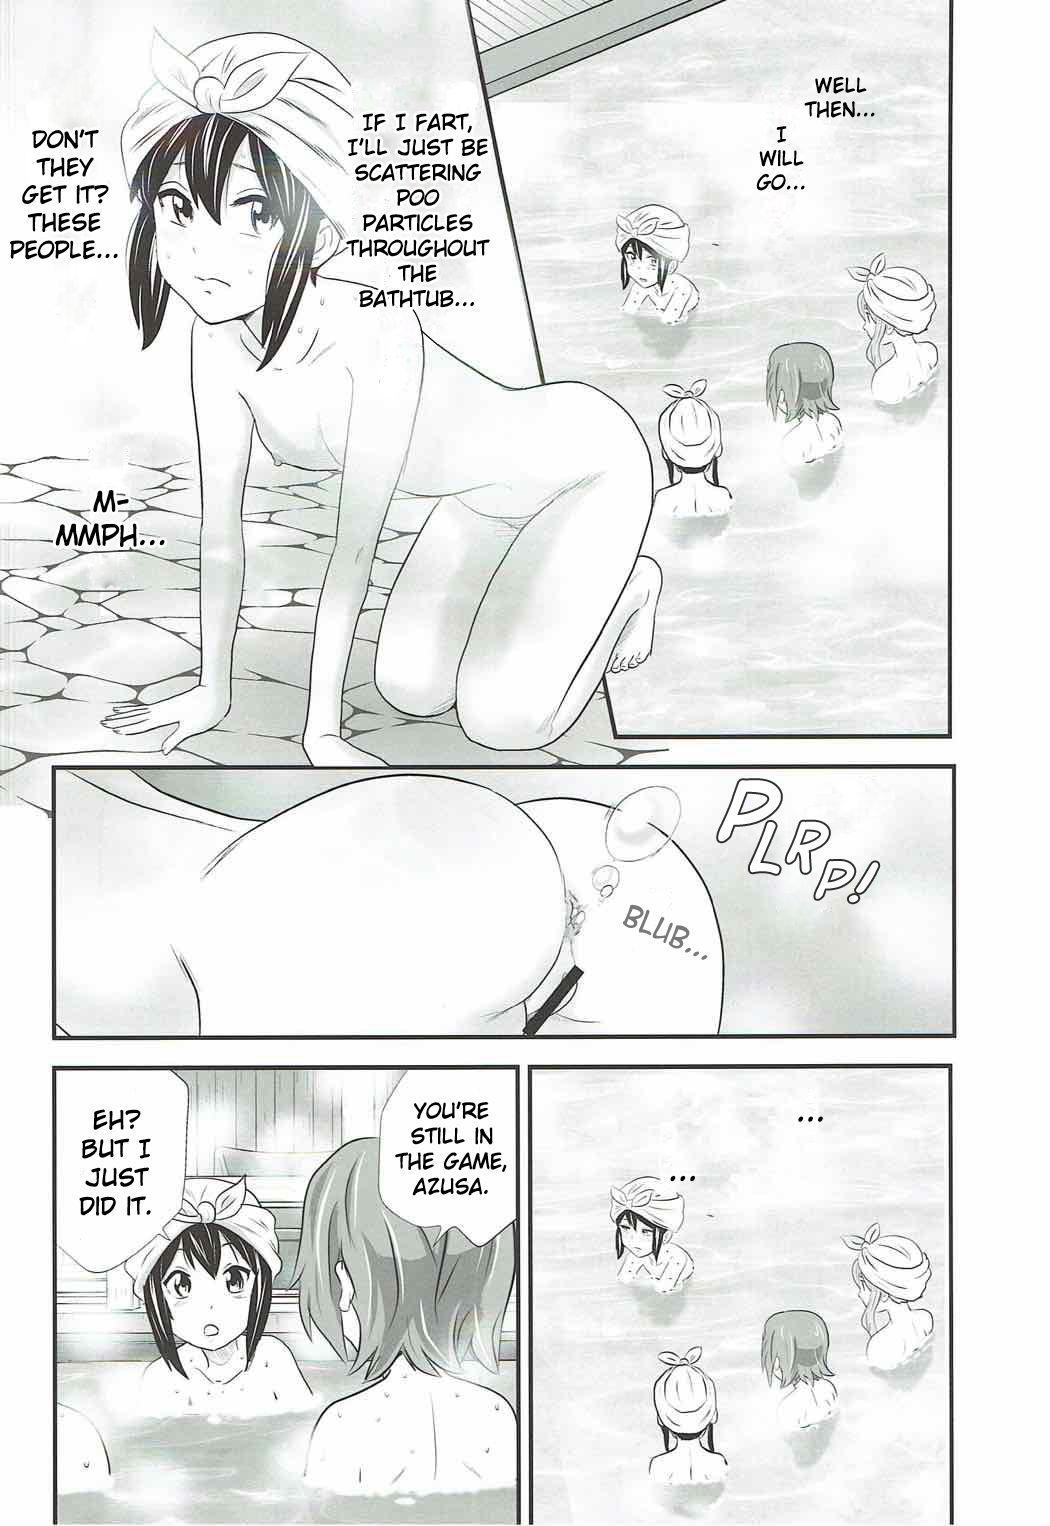 Taiwan Houkago Unchi Time Final | After School Poop Time Final - K-on Furry - Page 7